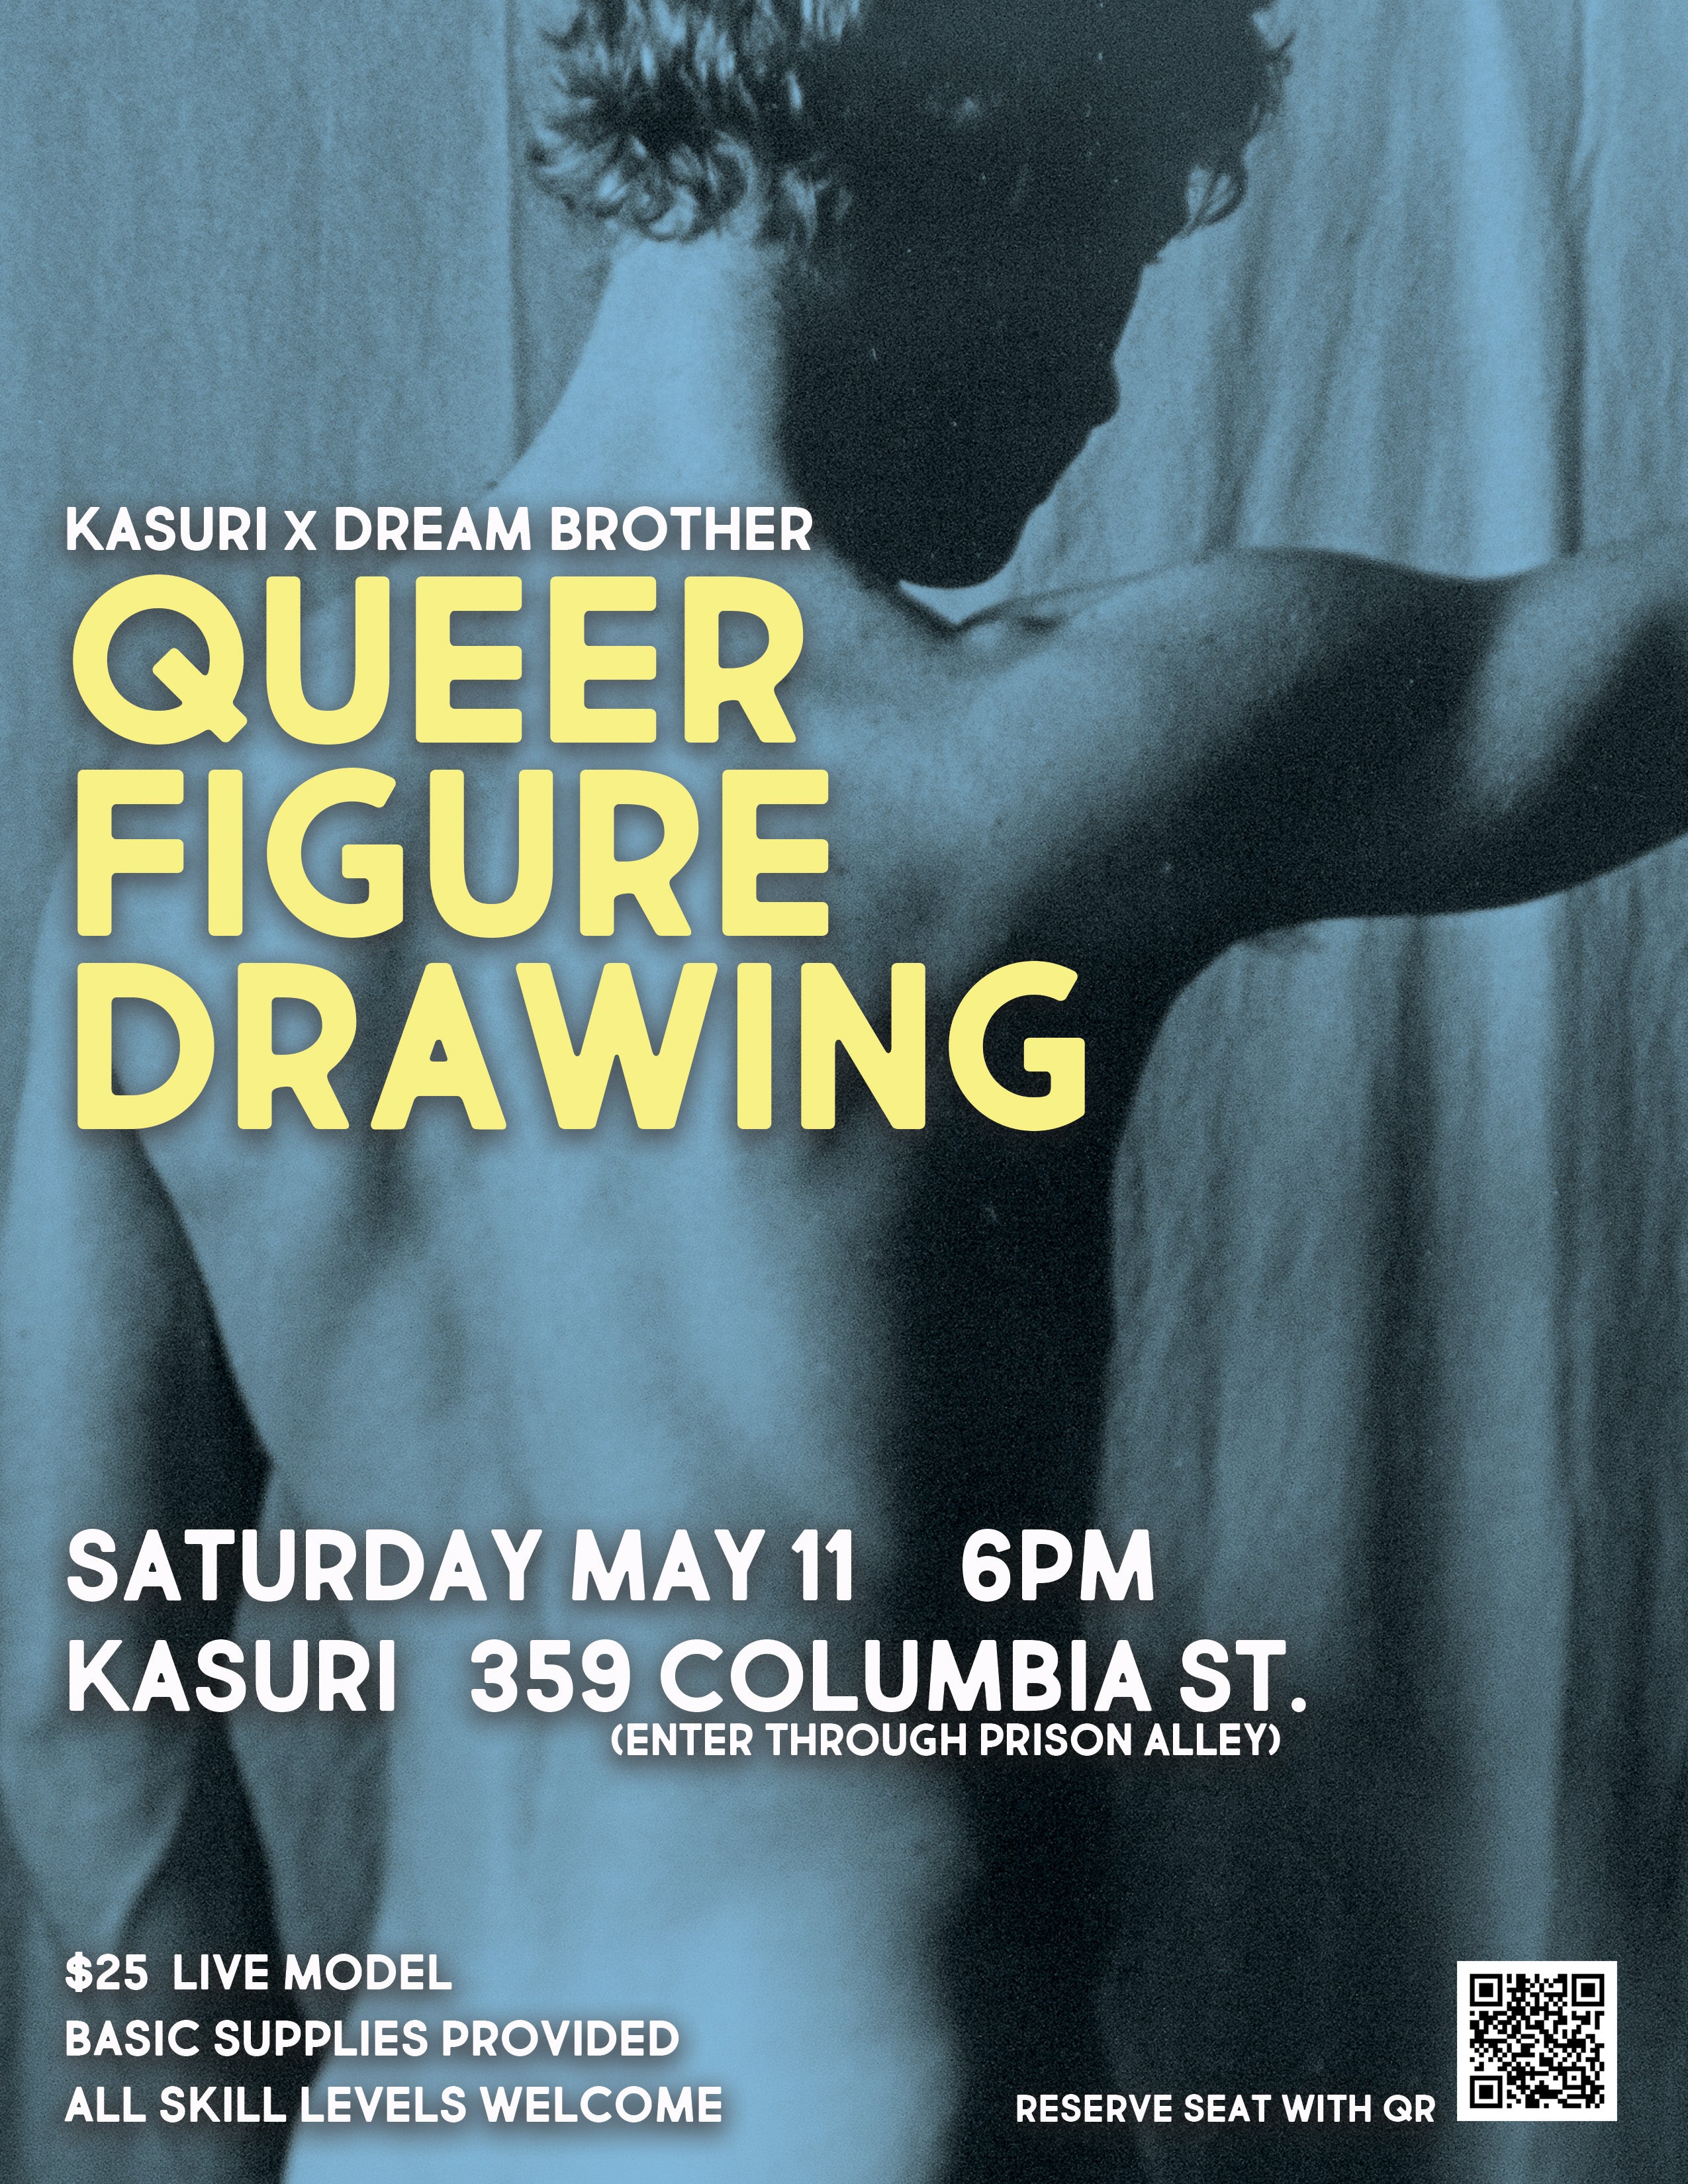 QUEER FIGURE DRAWING GROUP